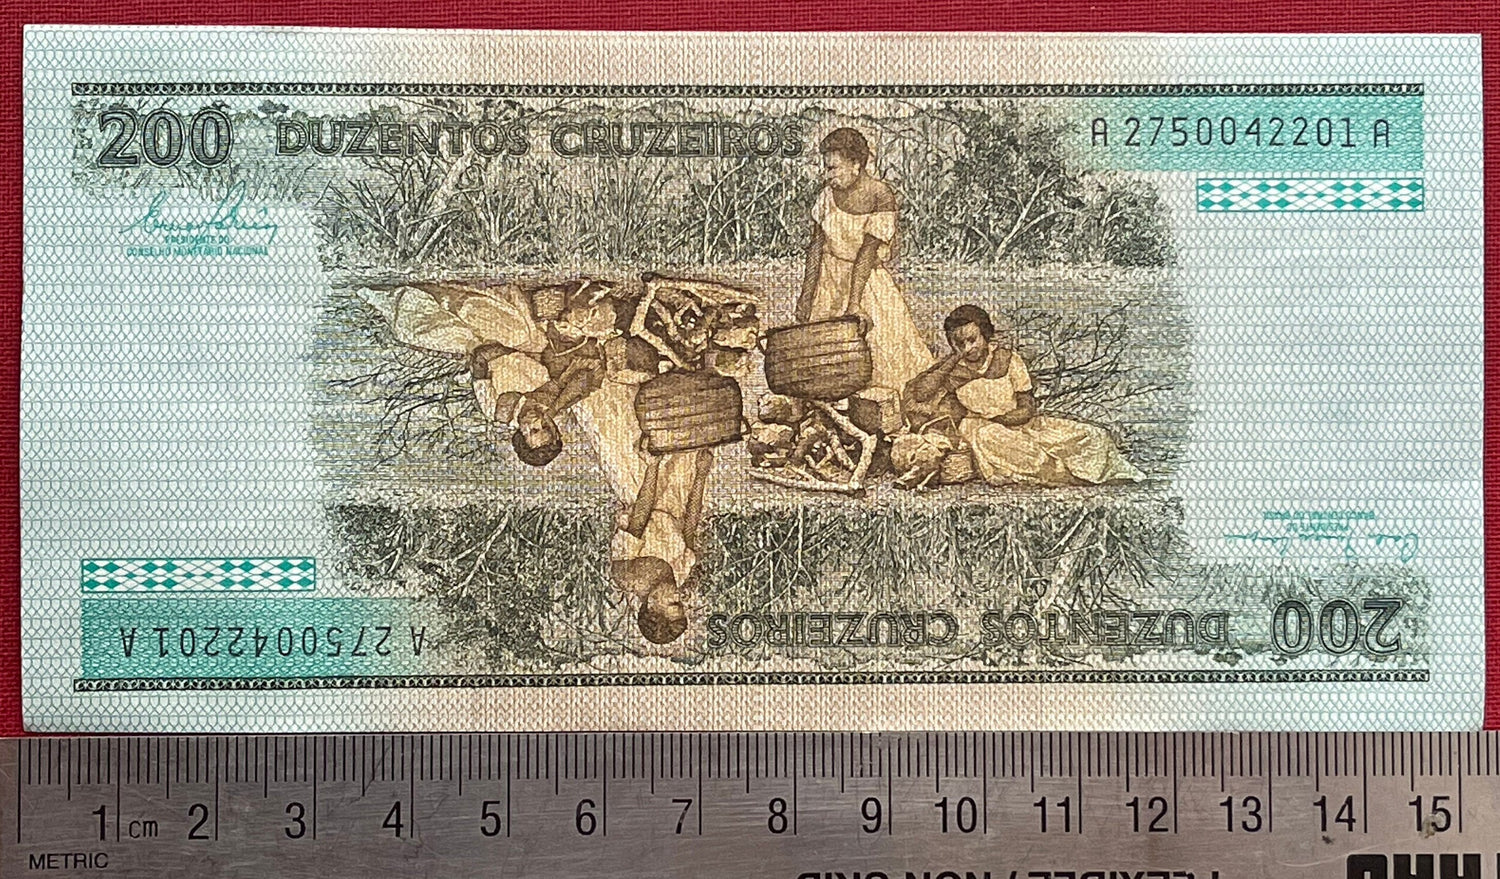 The Redemptress, Isabel, Princess Imperial & Freed Slaves 200 Cruzieros Brazil Authentic Banknote Money for Collage (Abolition) (Golden Law)